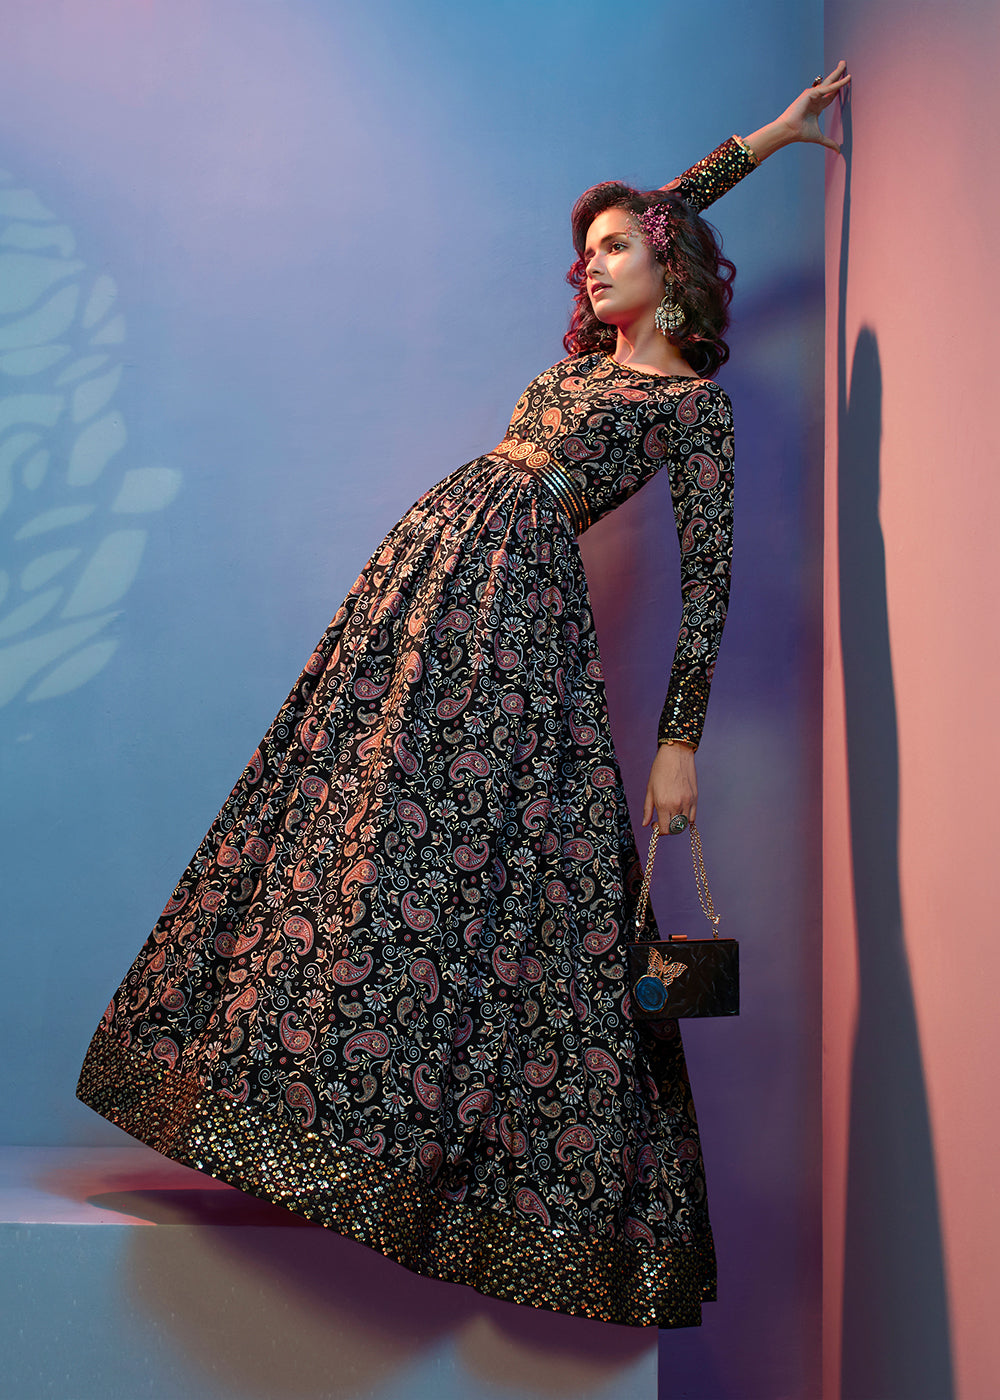 Buy Now Floral Printed Exquisite Black Crepe Wedding Festive Party Gown Online in USA, UK, Australia, New Zealand, Canada & Worldwide at Empress Clothing. 